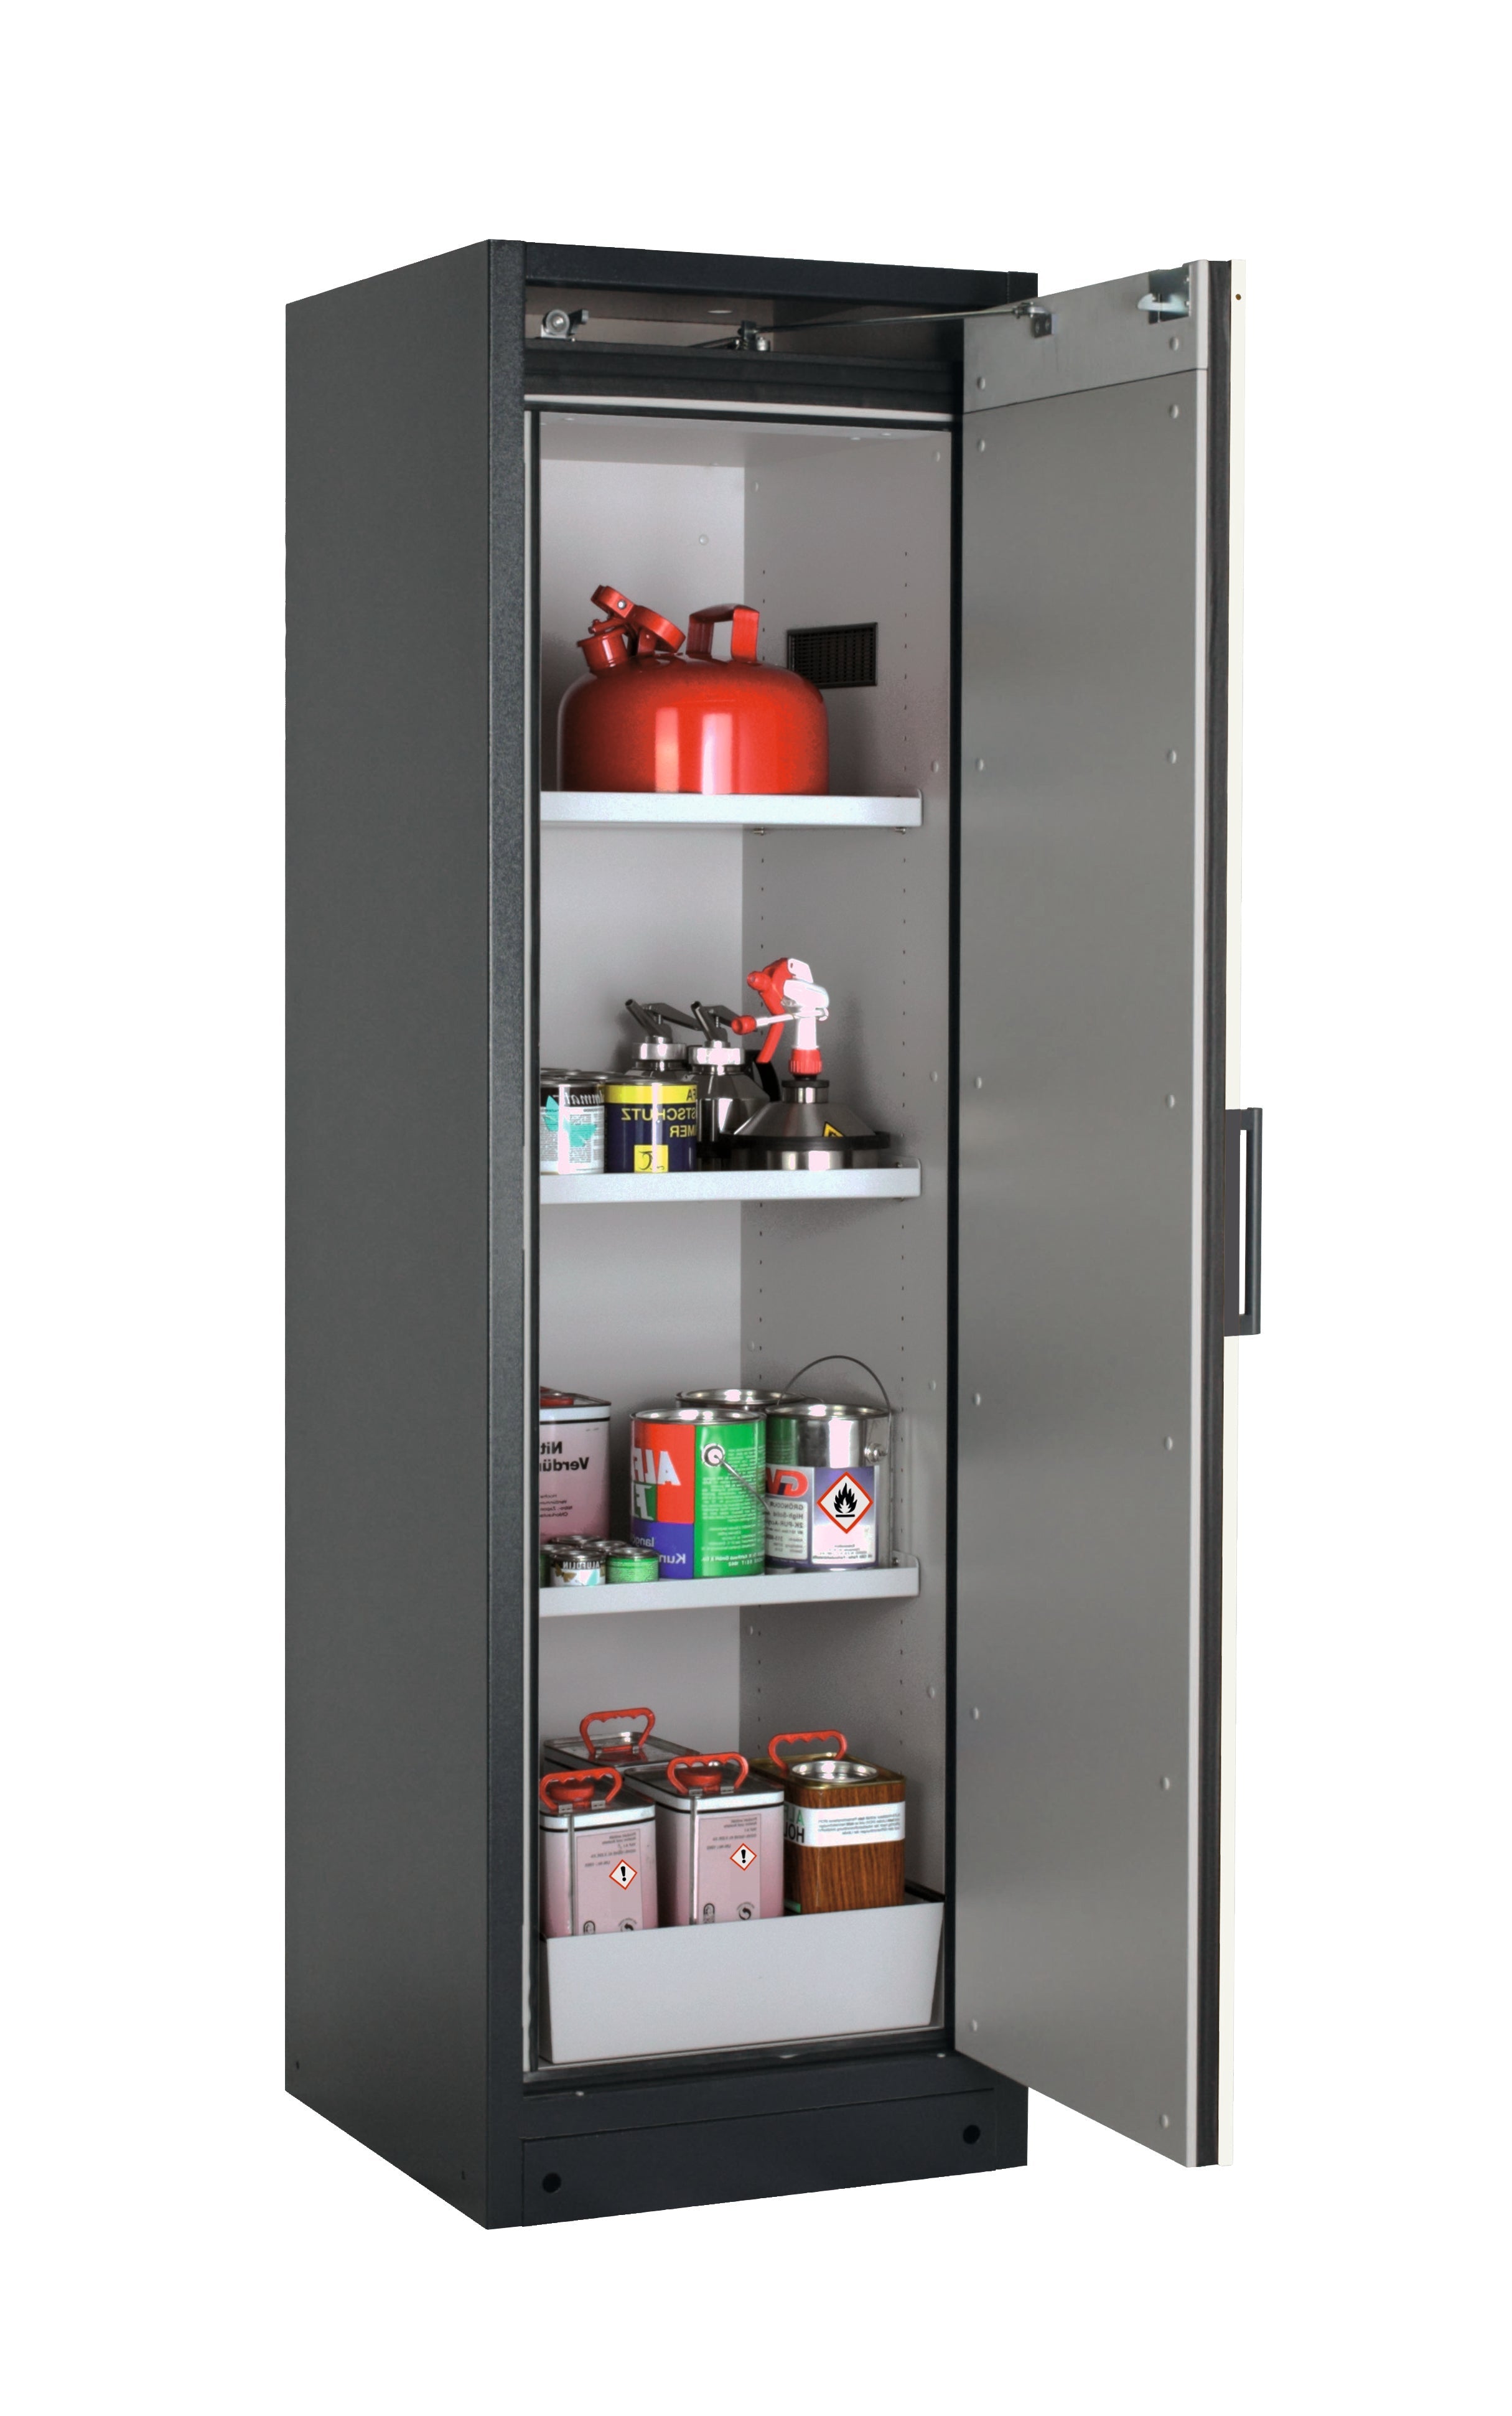 Type 90 safety storage cabinet Q-CLASSIC-90 model Q90.195.060.R in asecos silver with 3x shelf standard (sheet steel),